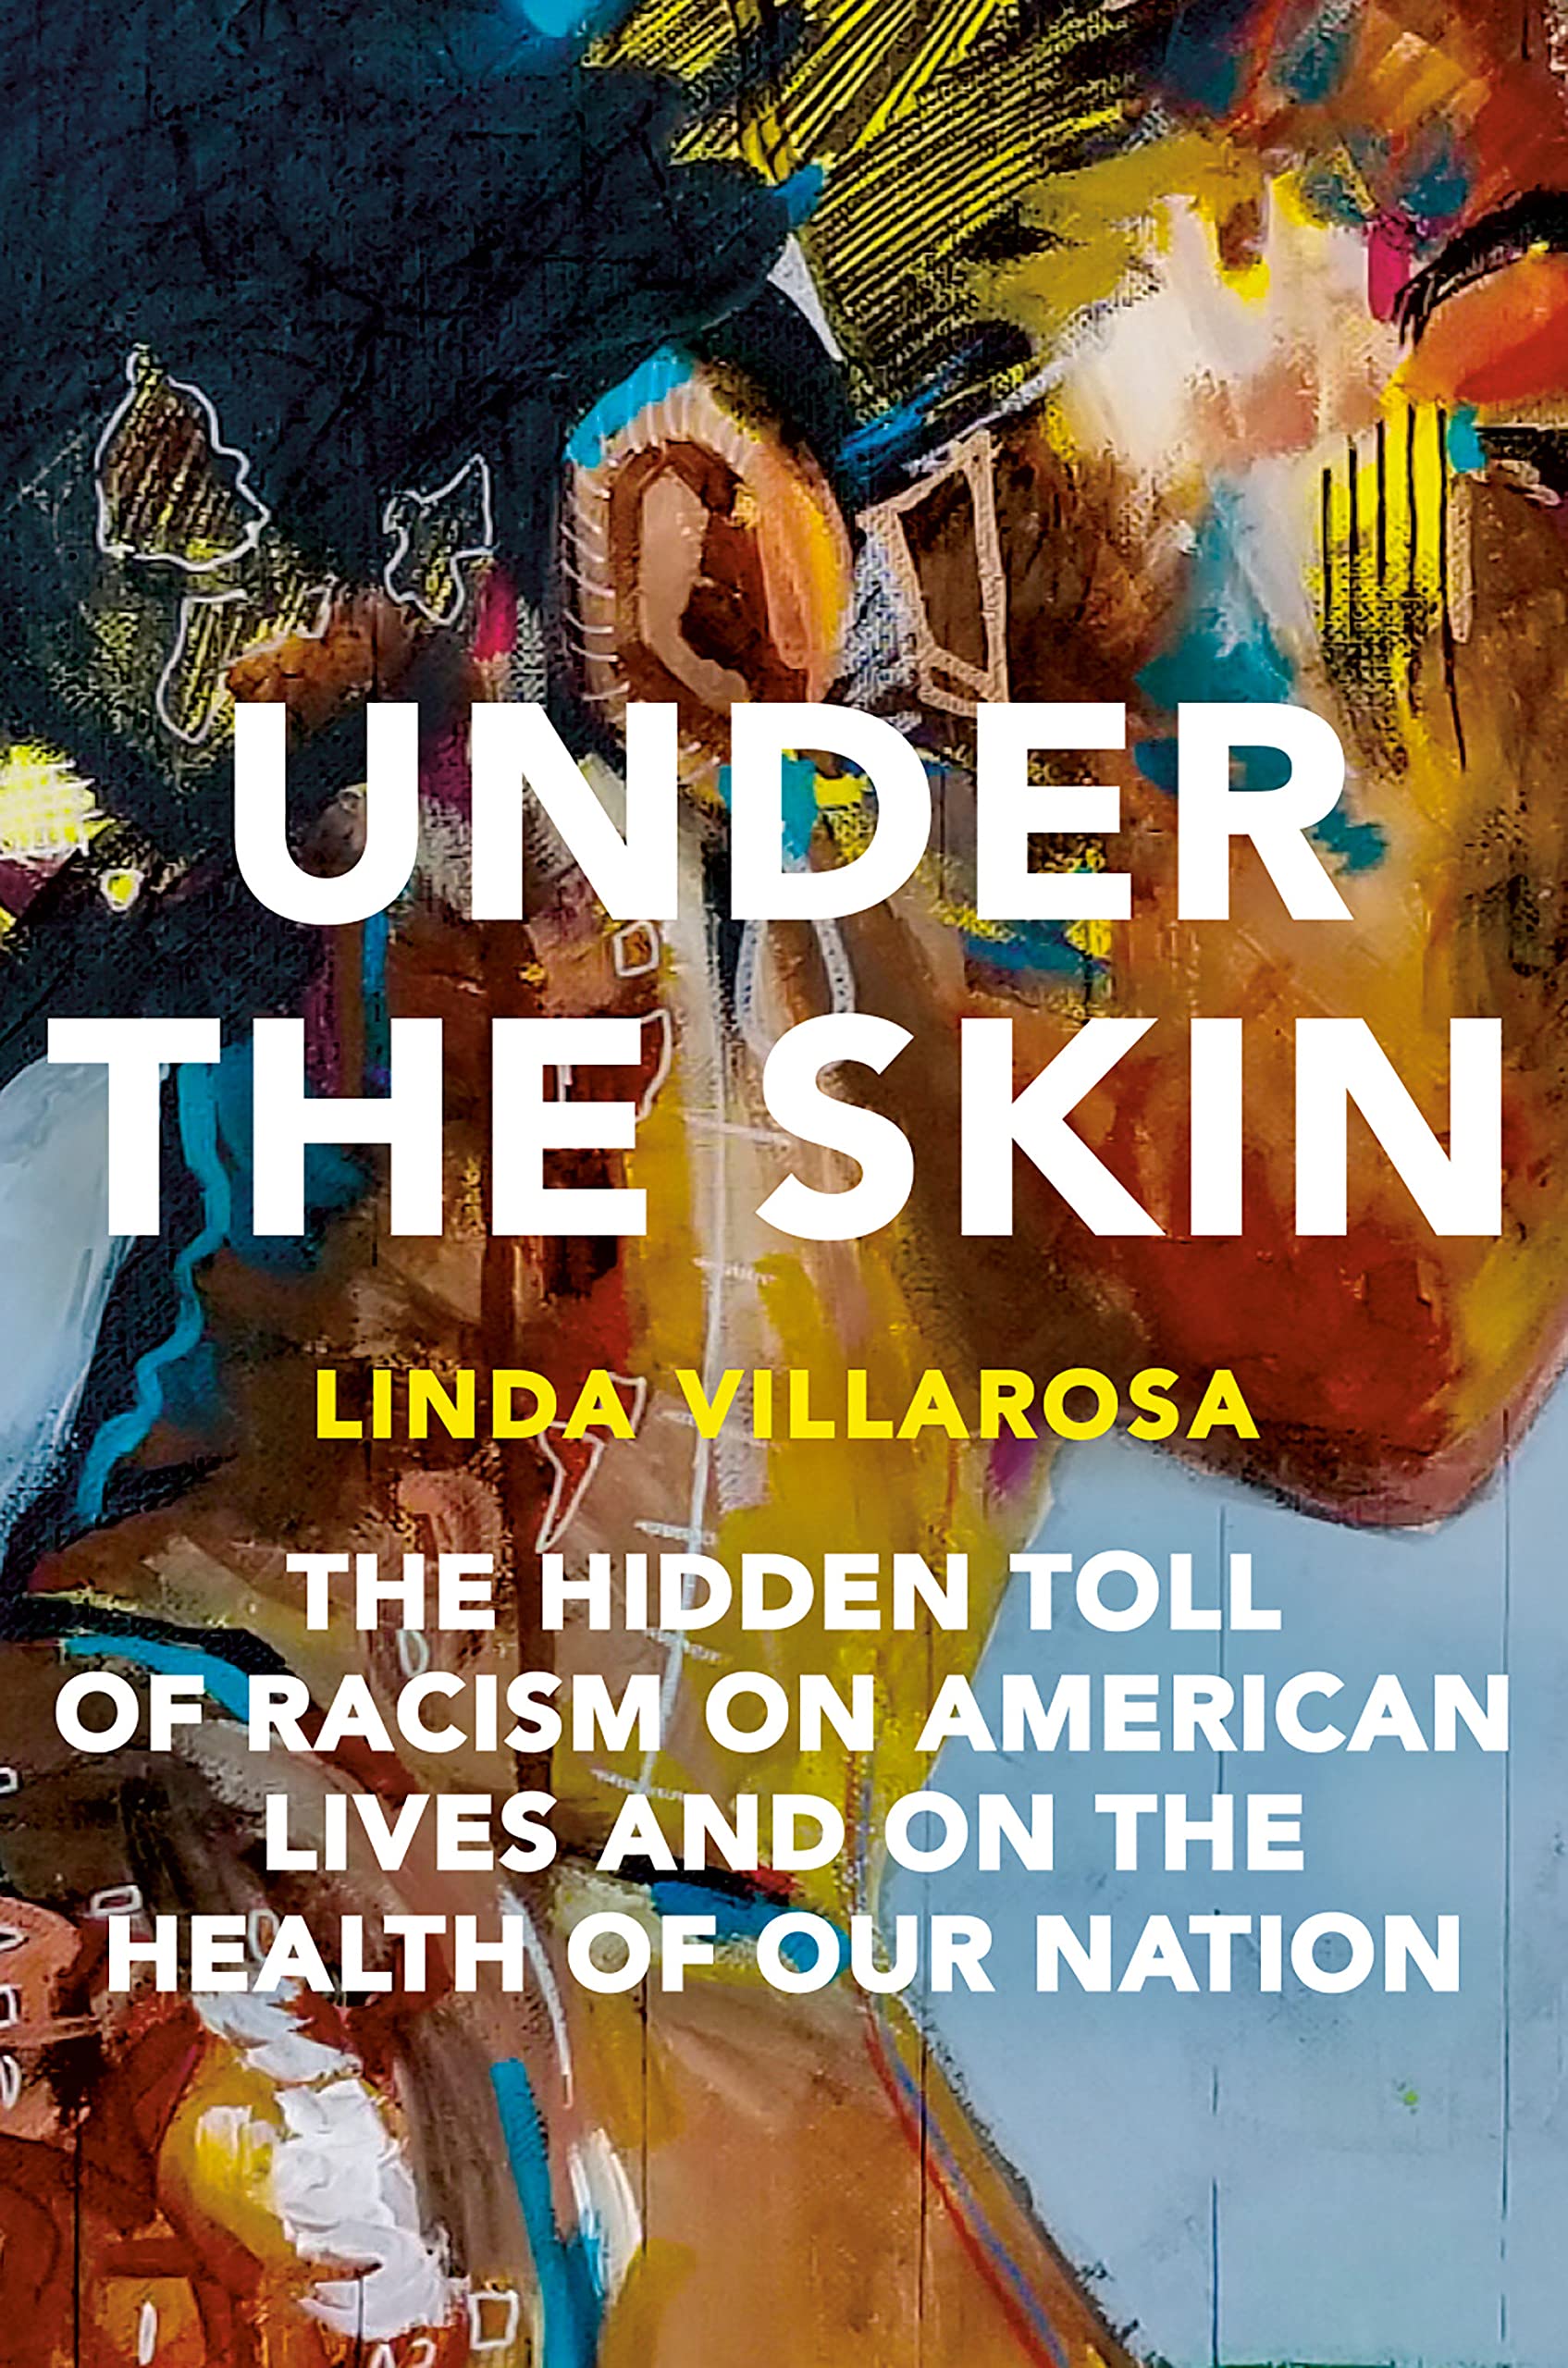 Under the Skin: The Hidden Toll of Racism on American Lives and on the Health of Our Nation Hardcover